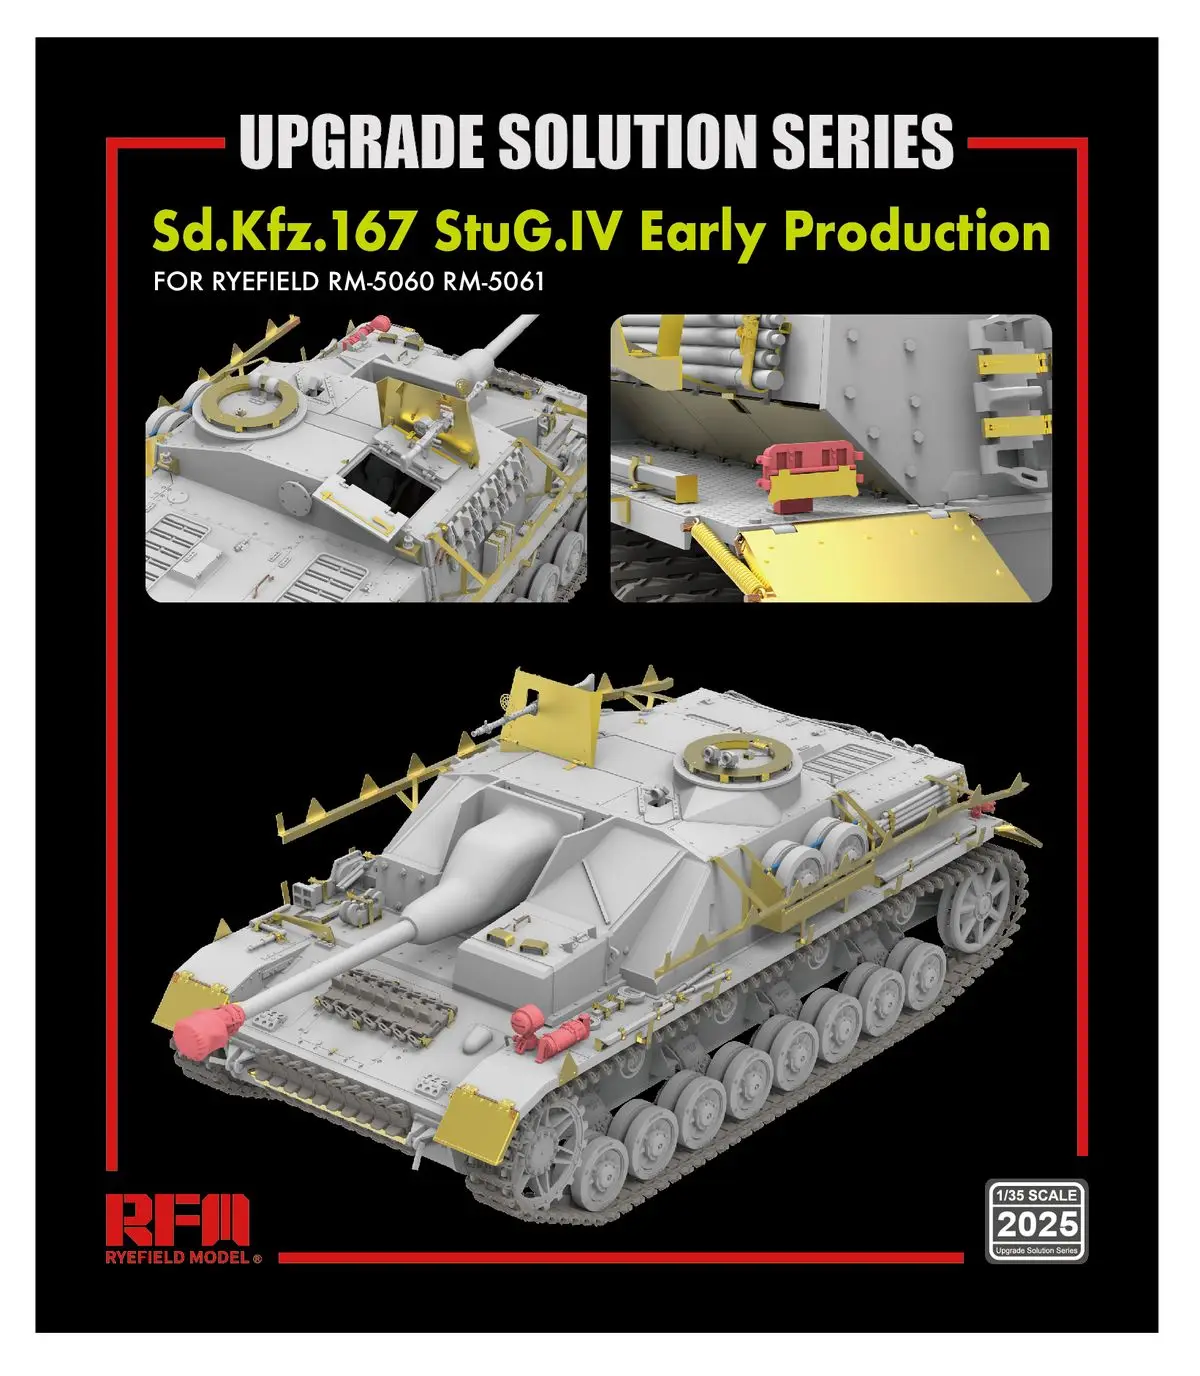 

RYEFIELD MODEL RFM RM-2025 1/35 Upgrade Set for Sd.Kfz.167 StuG.IV Early Production